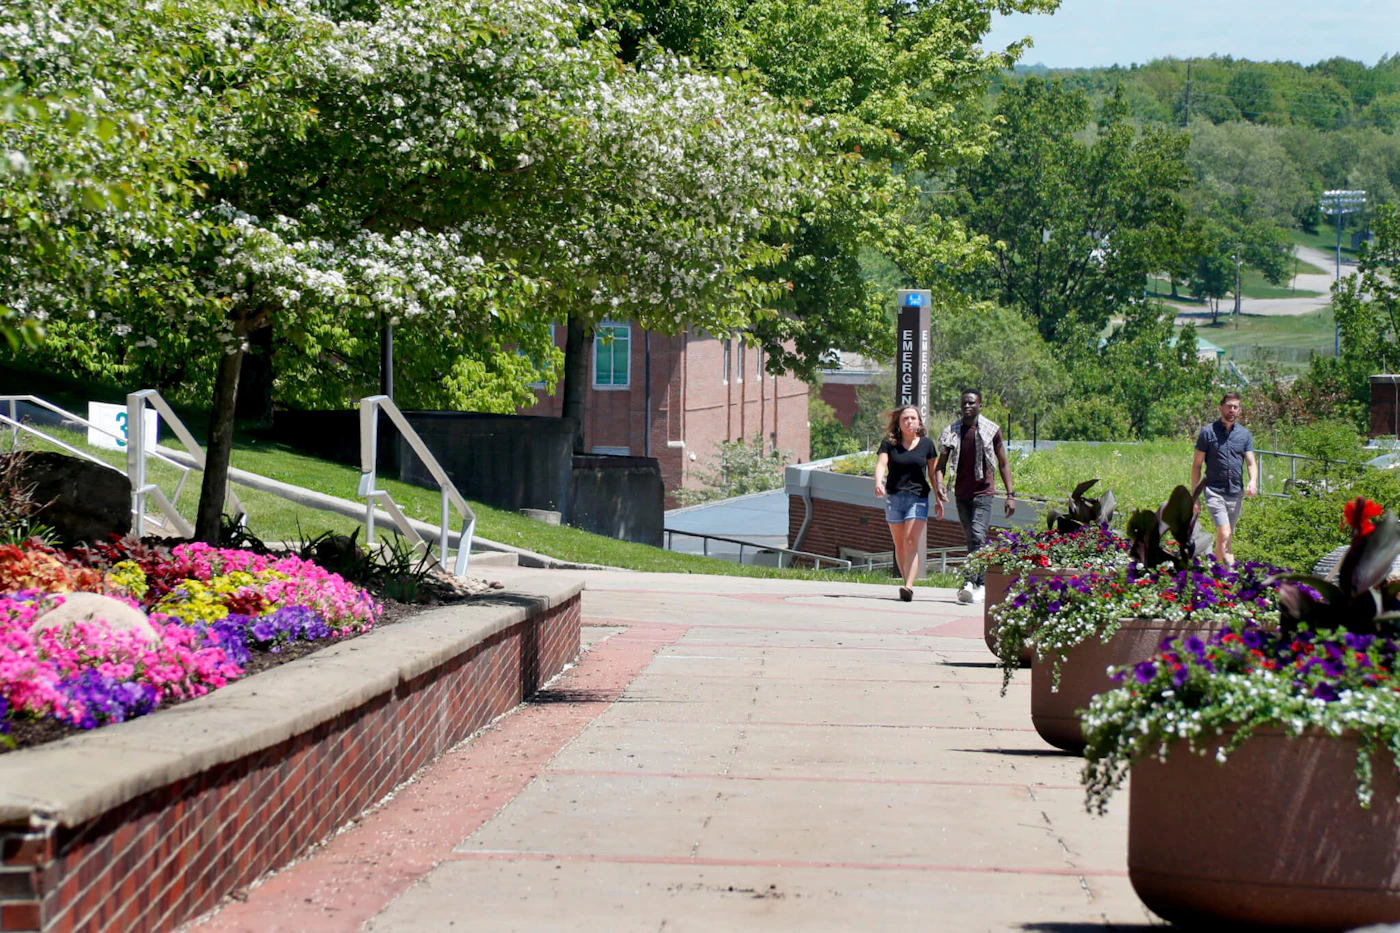 Visitors walk through the campus of Slippery Rock University in Slippery Rock, Butler County, in May 2019. (AP File Photo/Keith Srakocic)